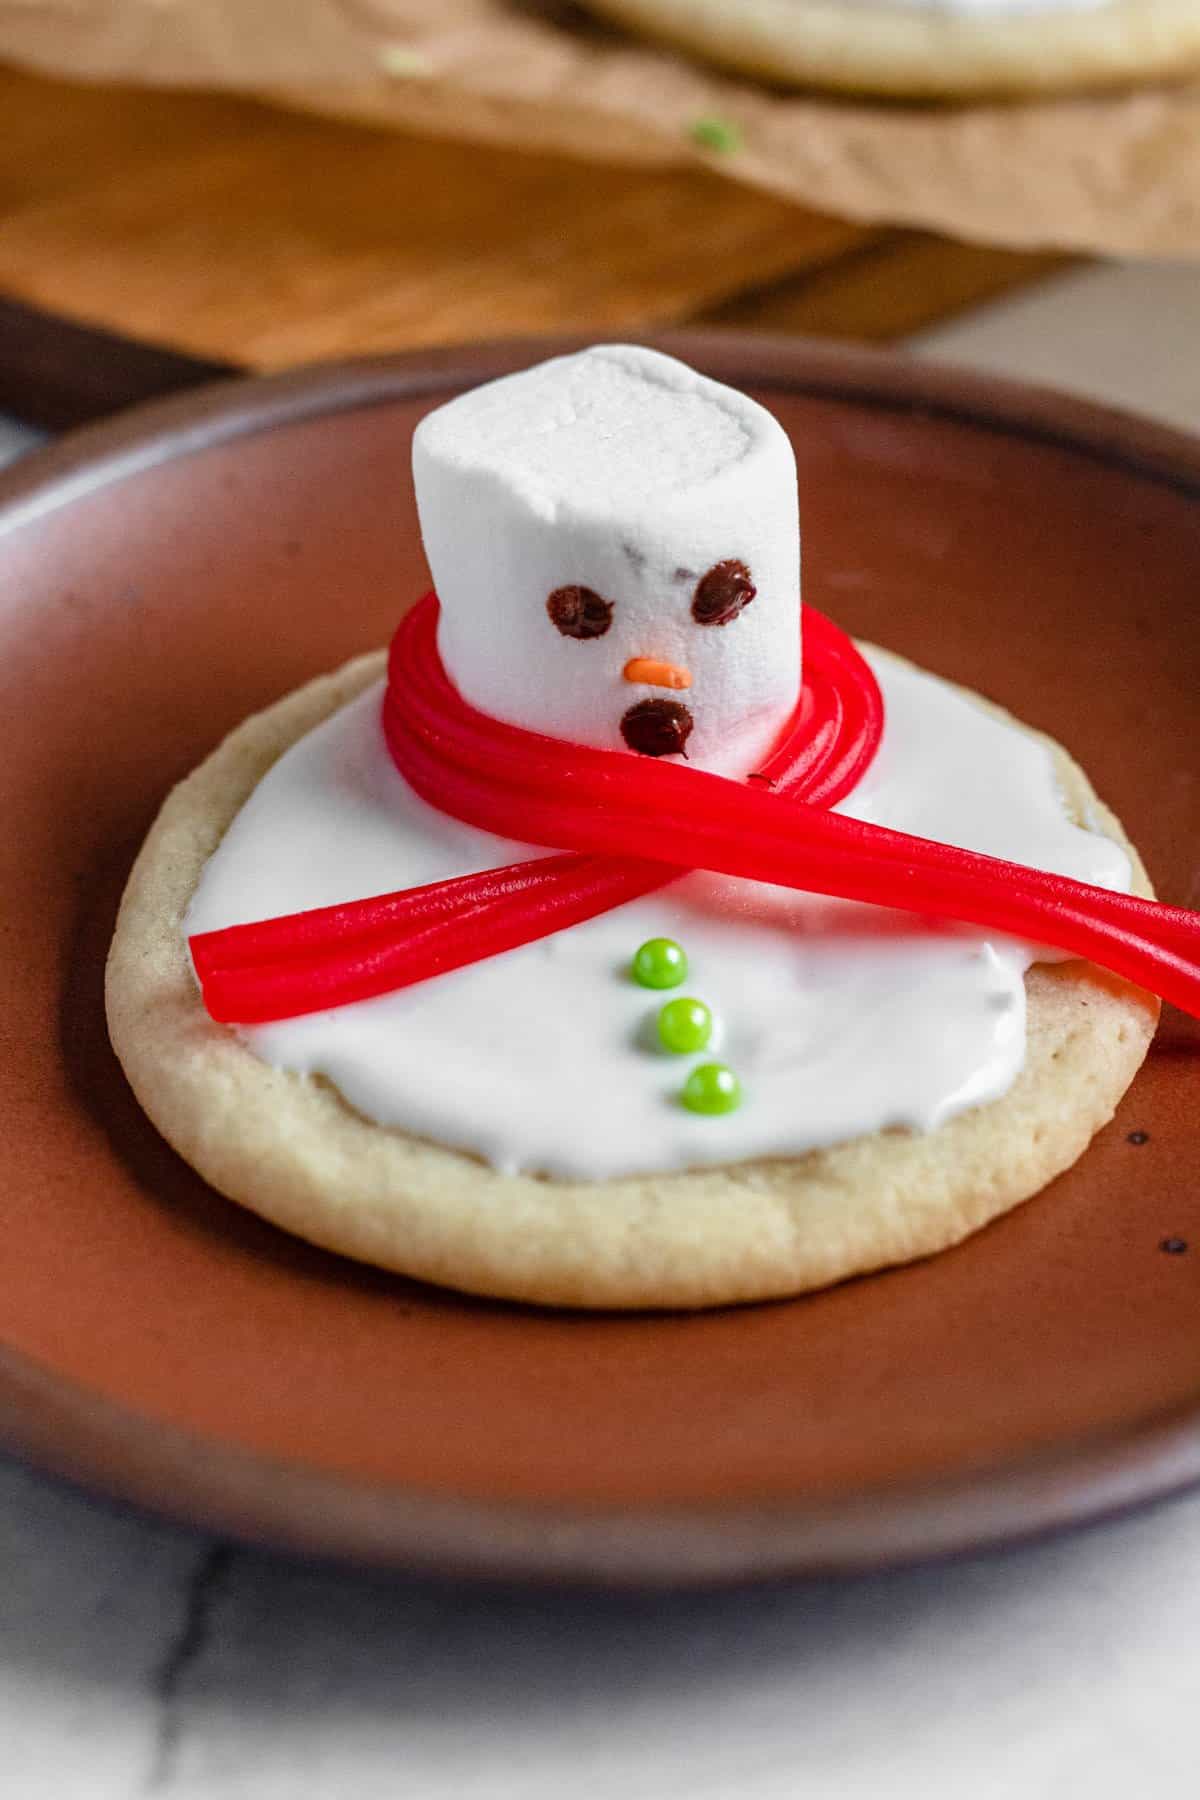 Melted chocolate added to the large marshmallow to include eyes and a nose on the melted snowman cookies. 